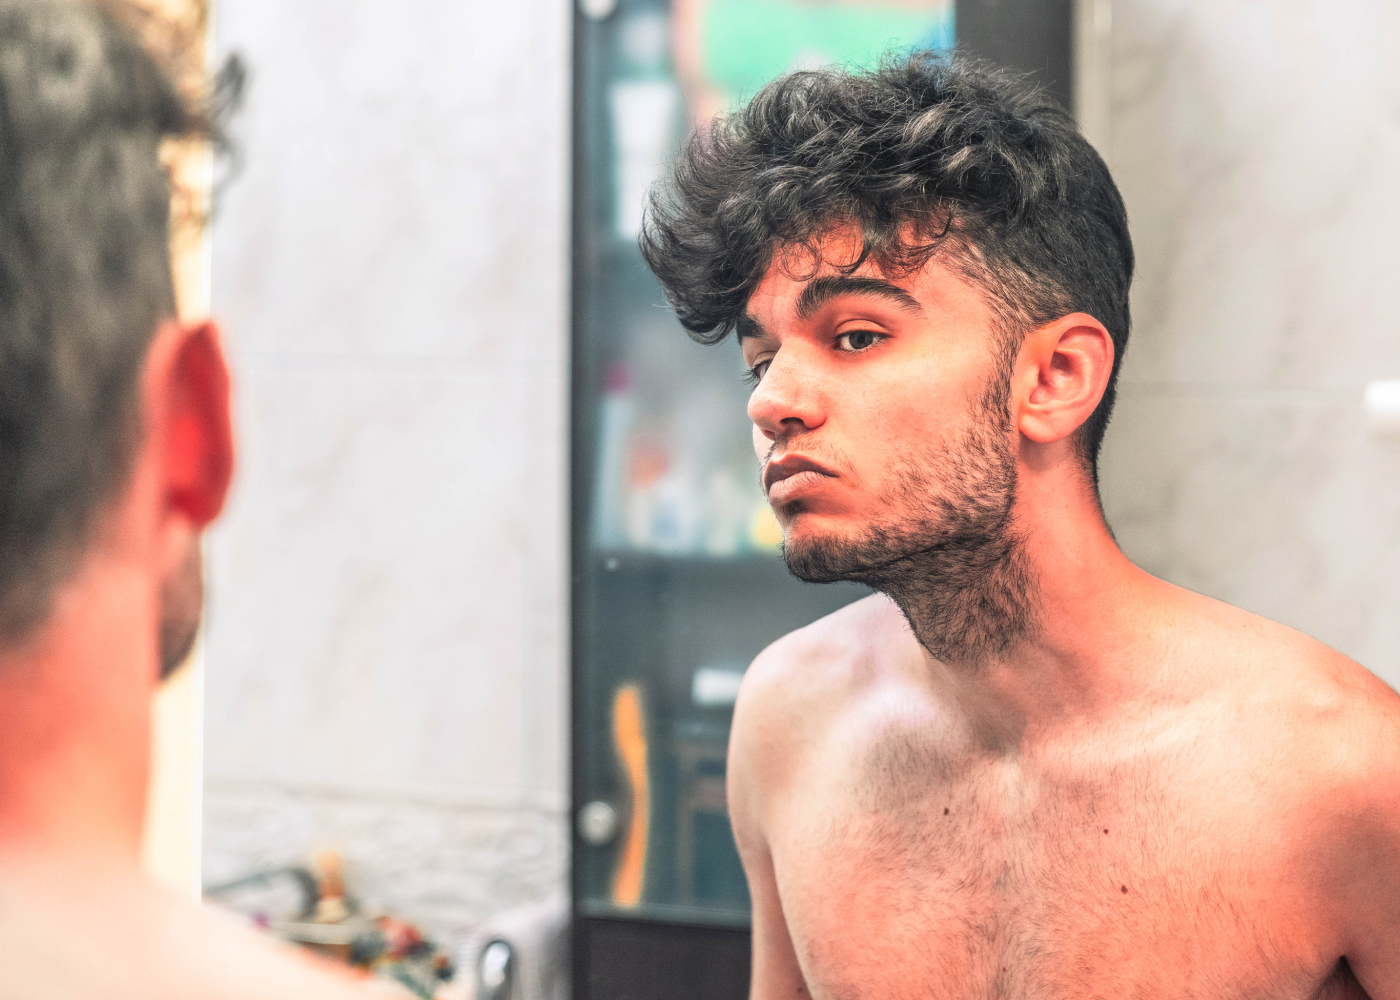 Ouch! Everything You Need to Know About How to Shave Without Getting Cut